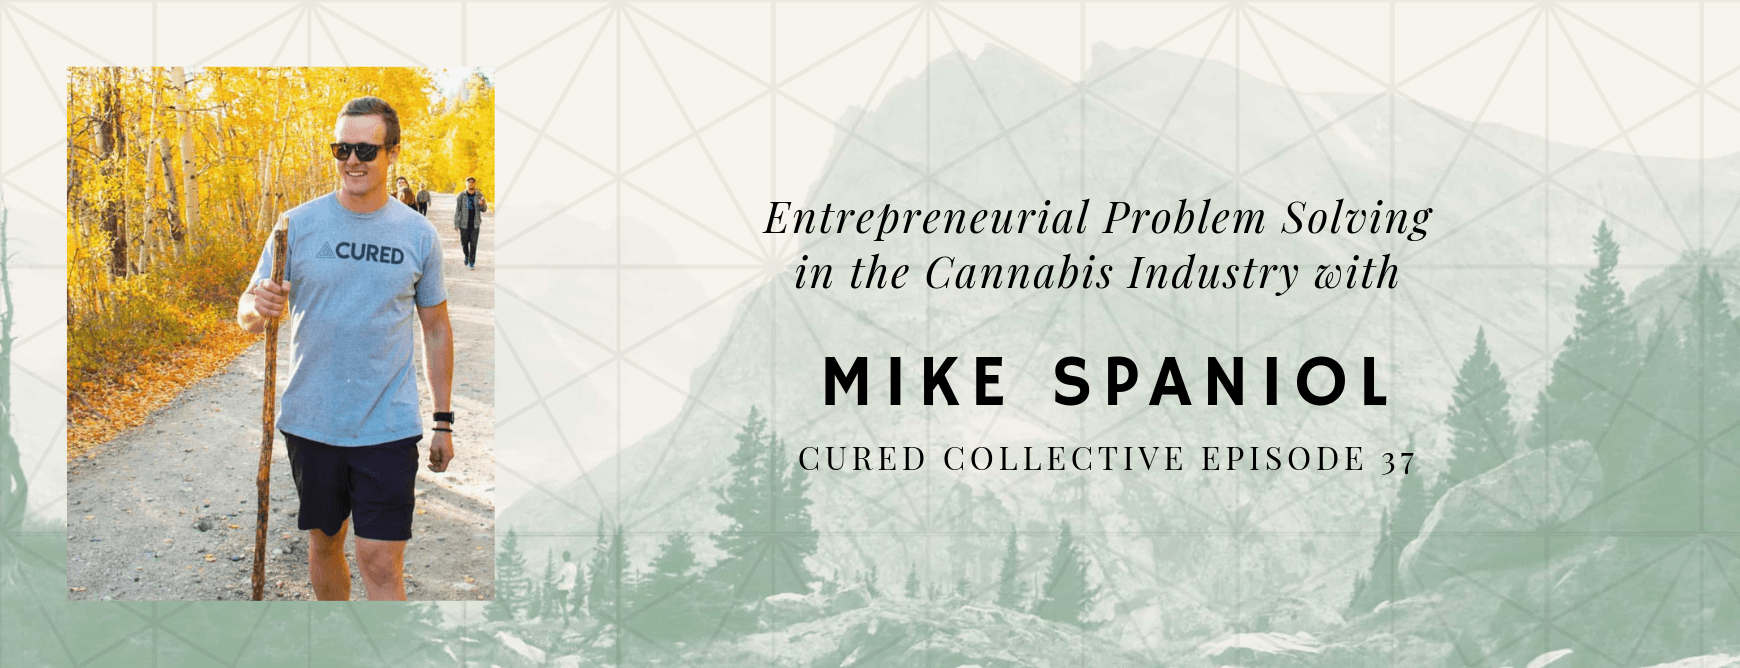 Cured Collective CBD Podcast with Mike Spaniol